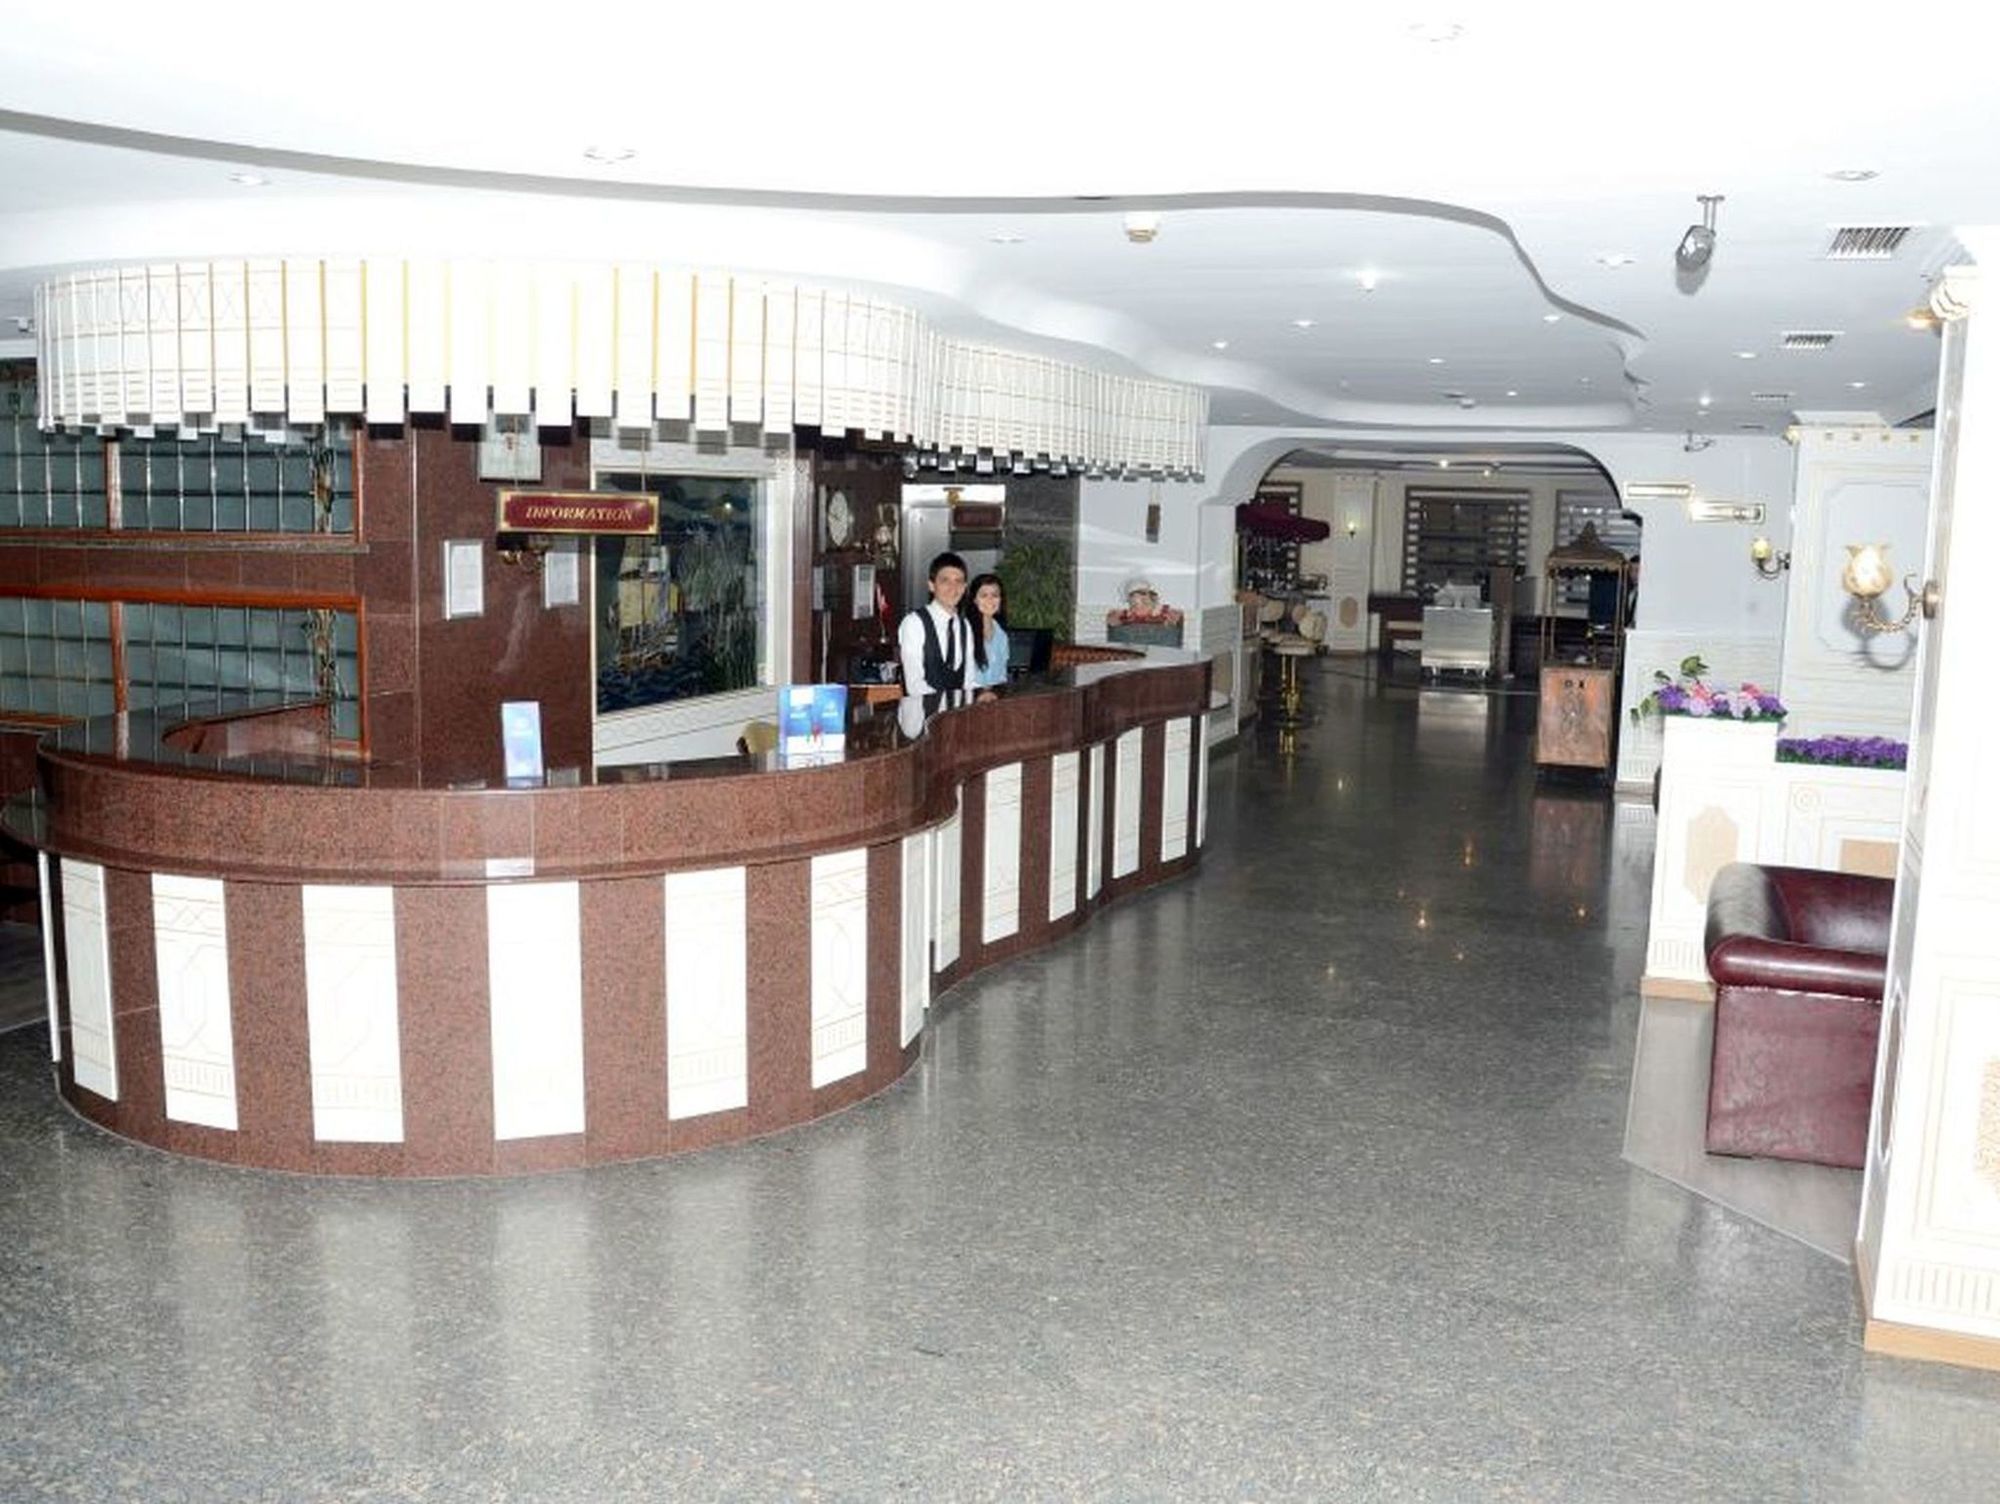 Sevcan Hotel (Sevcan Hotel Airport)